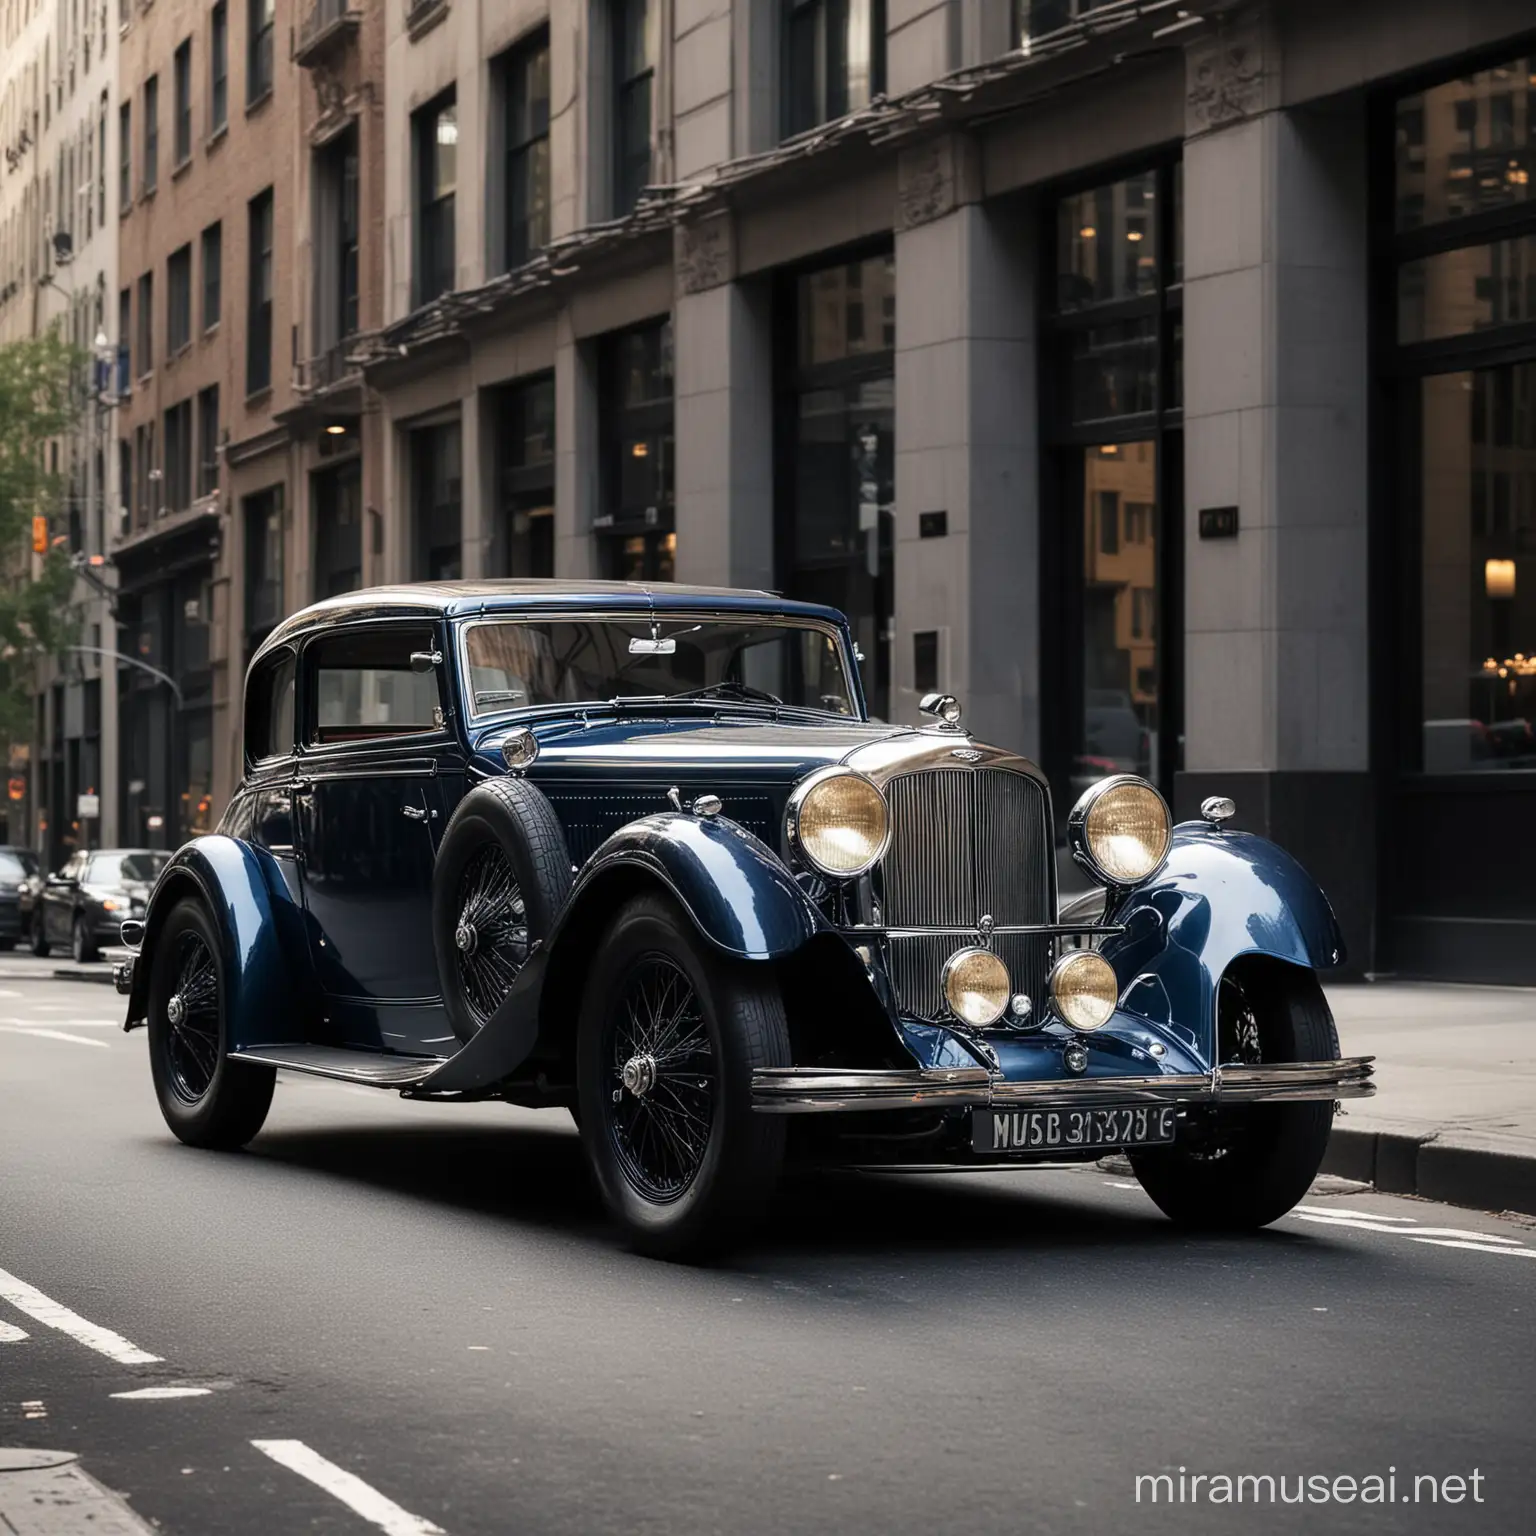 Classic Aston Martin 1932 Parked on New York City Street at 5 PM